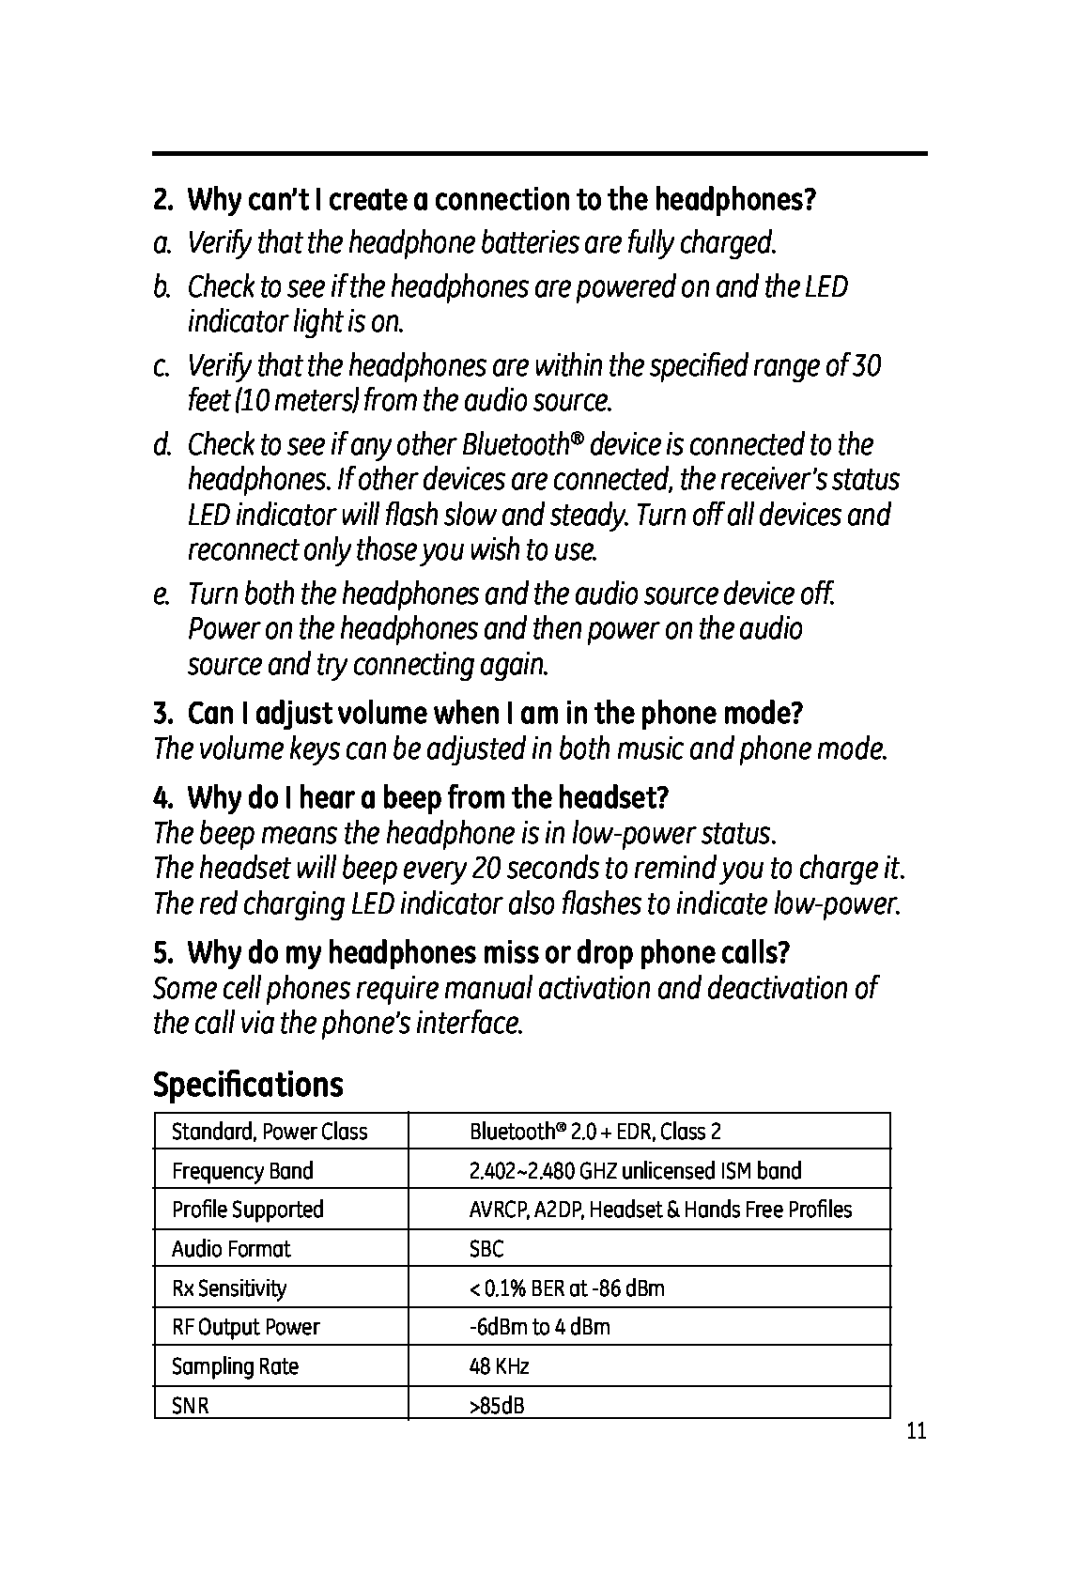 Jasco 99003 user manual Speciﬁcations, Why do I hear a beep from the headset? 